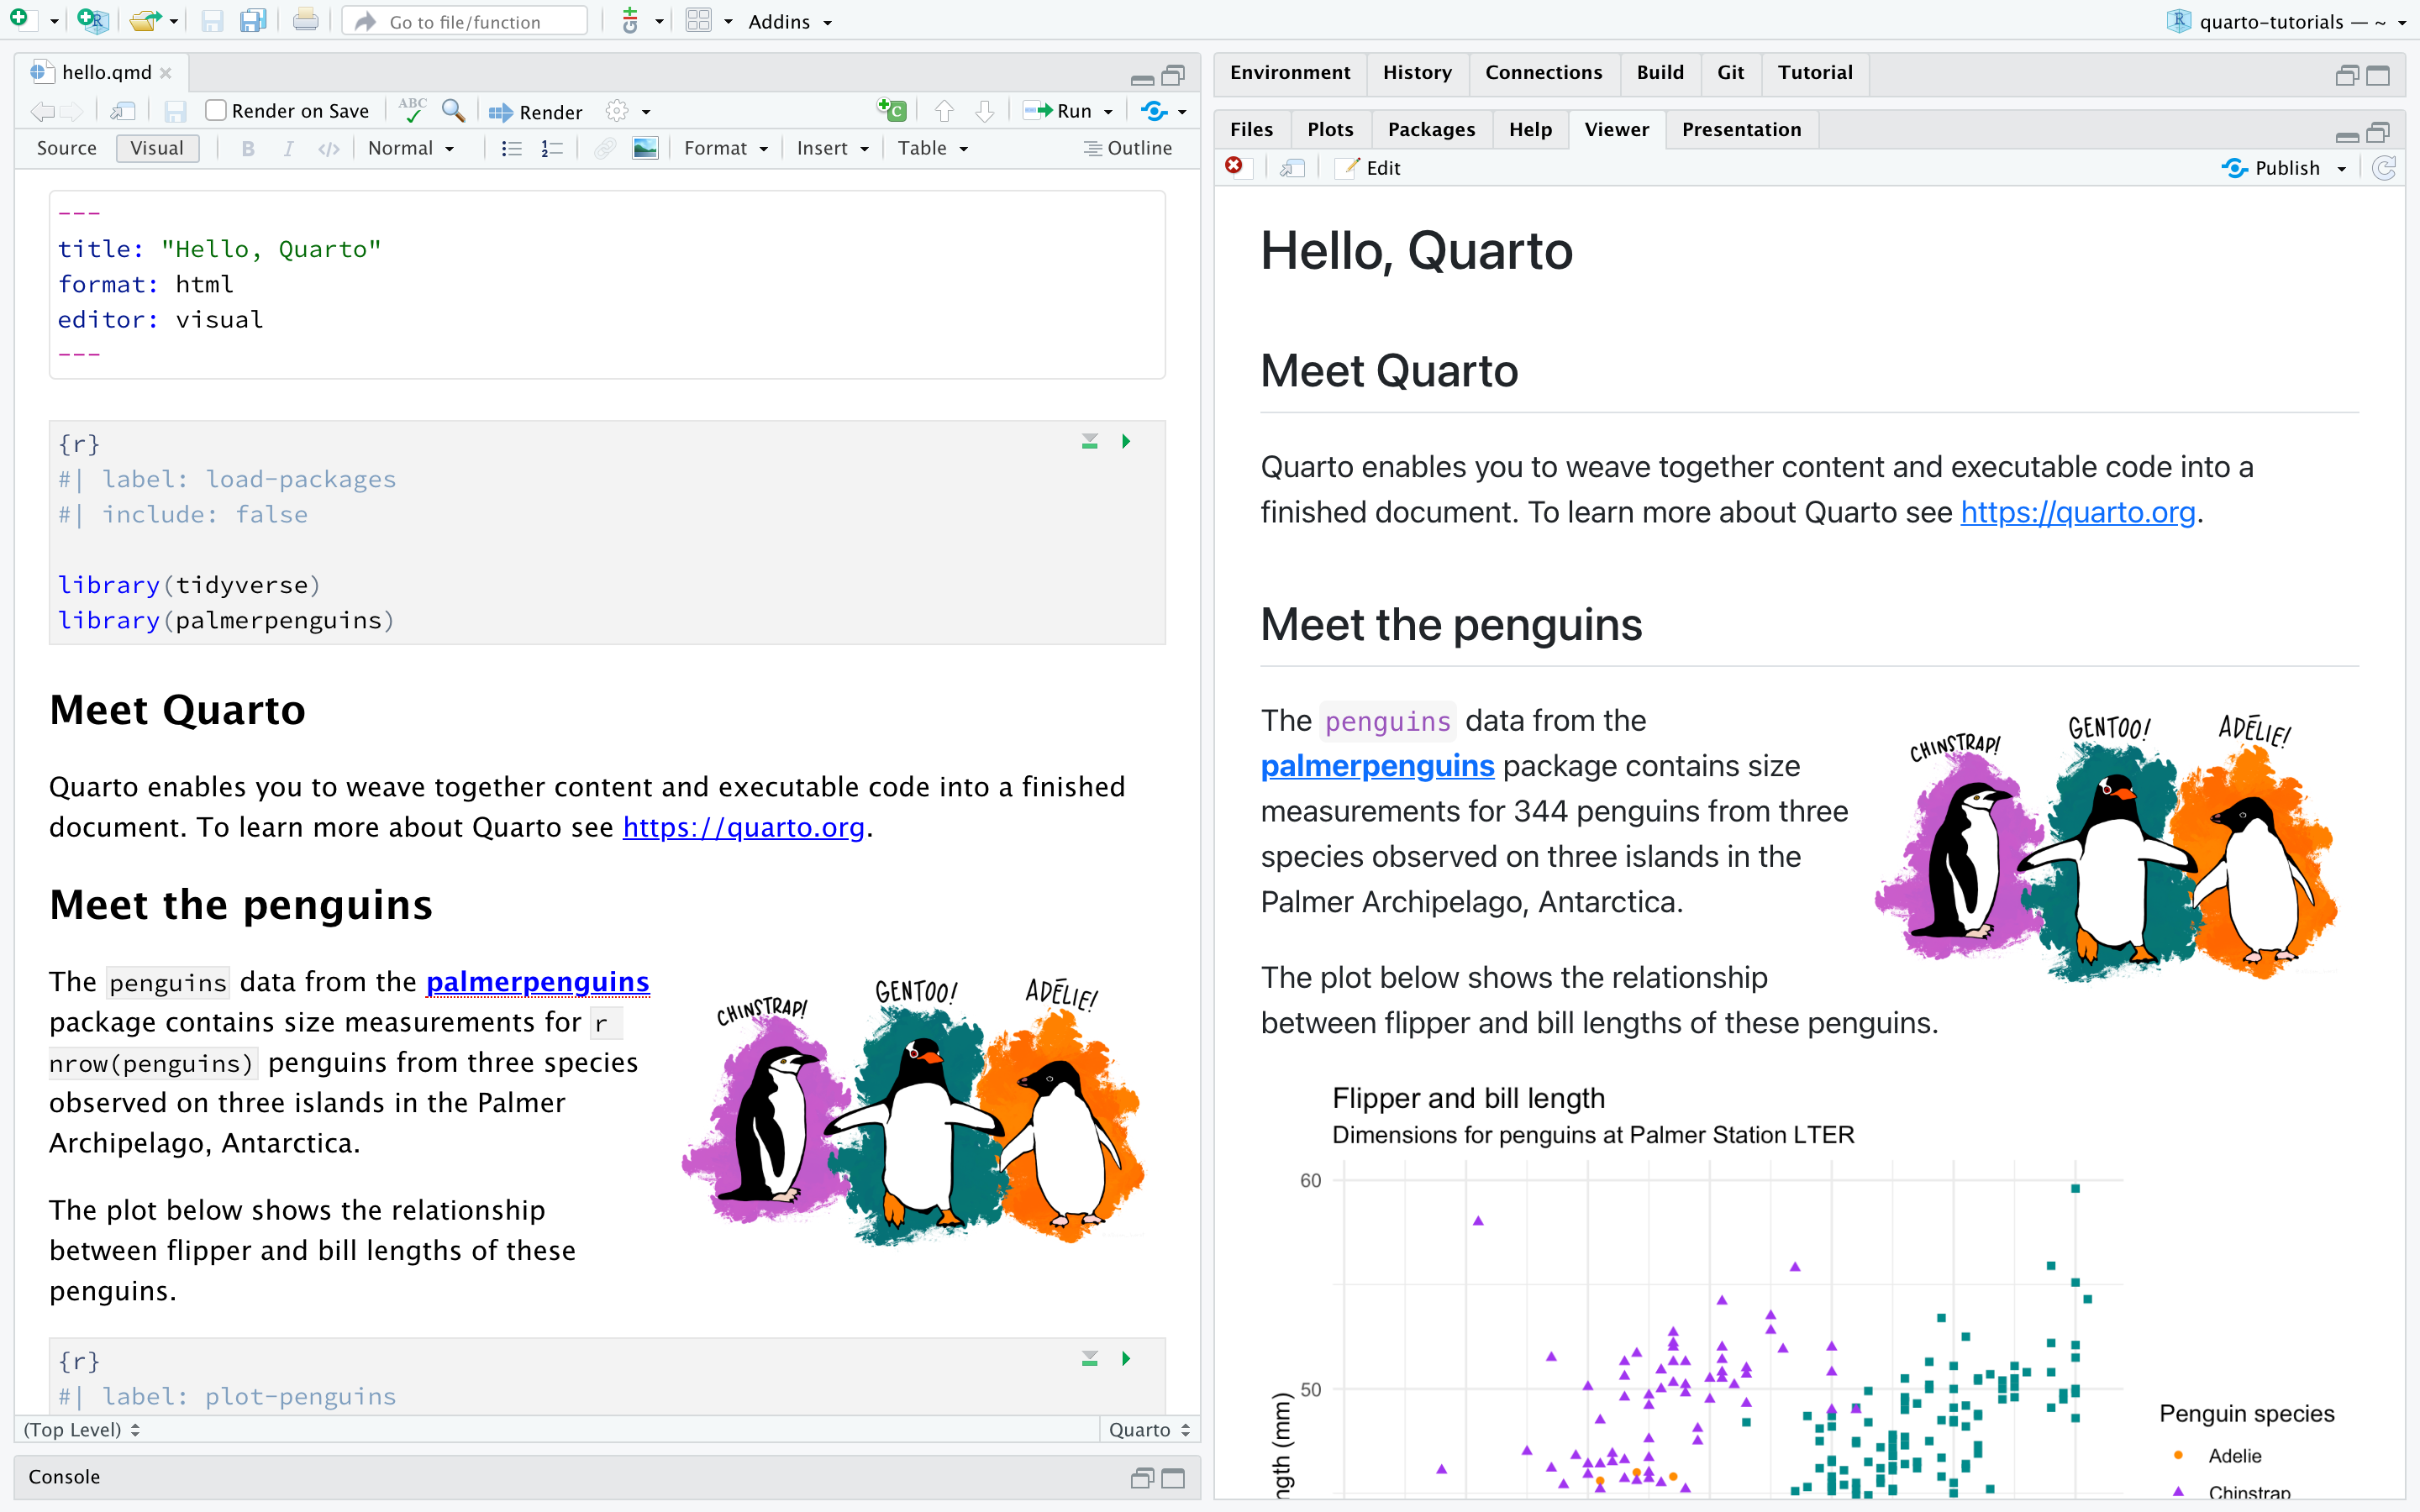 RStudio with a Quarto document titled "Penguins, meet Quarto!" open on the left side and the rendered version of the document on the right side.